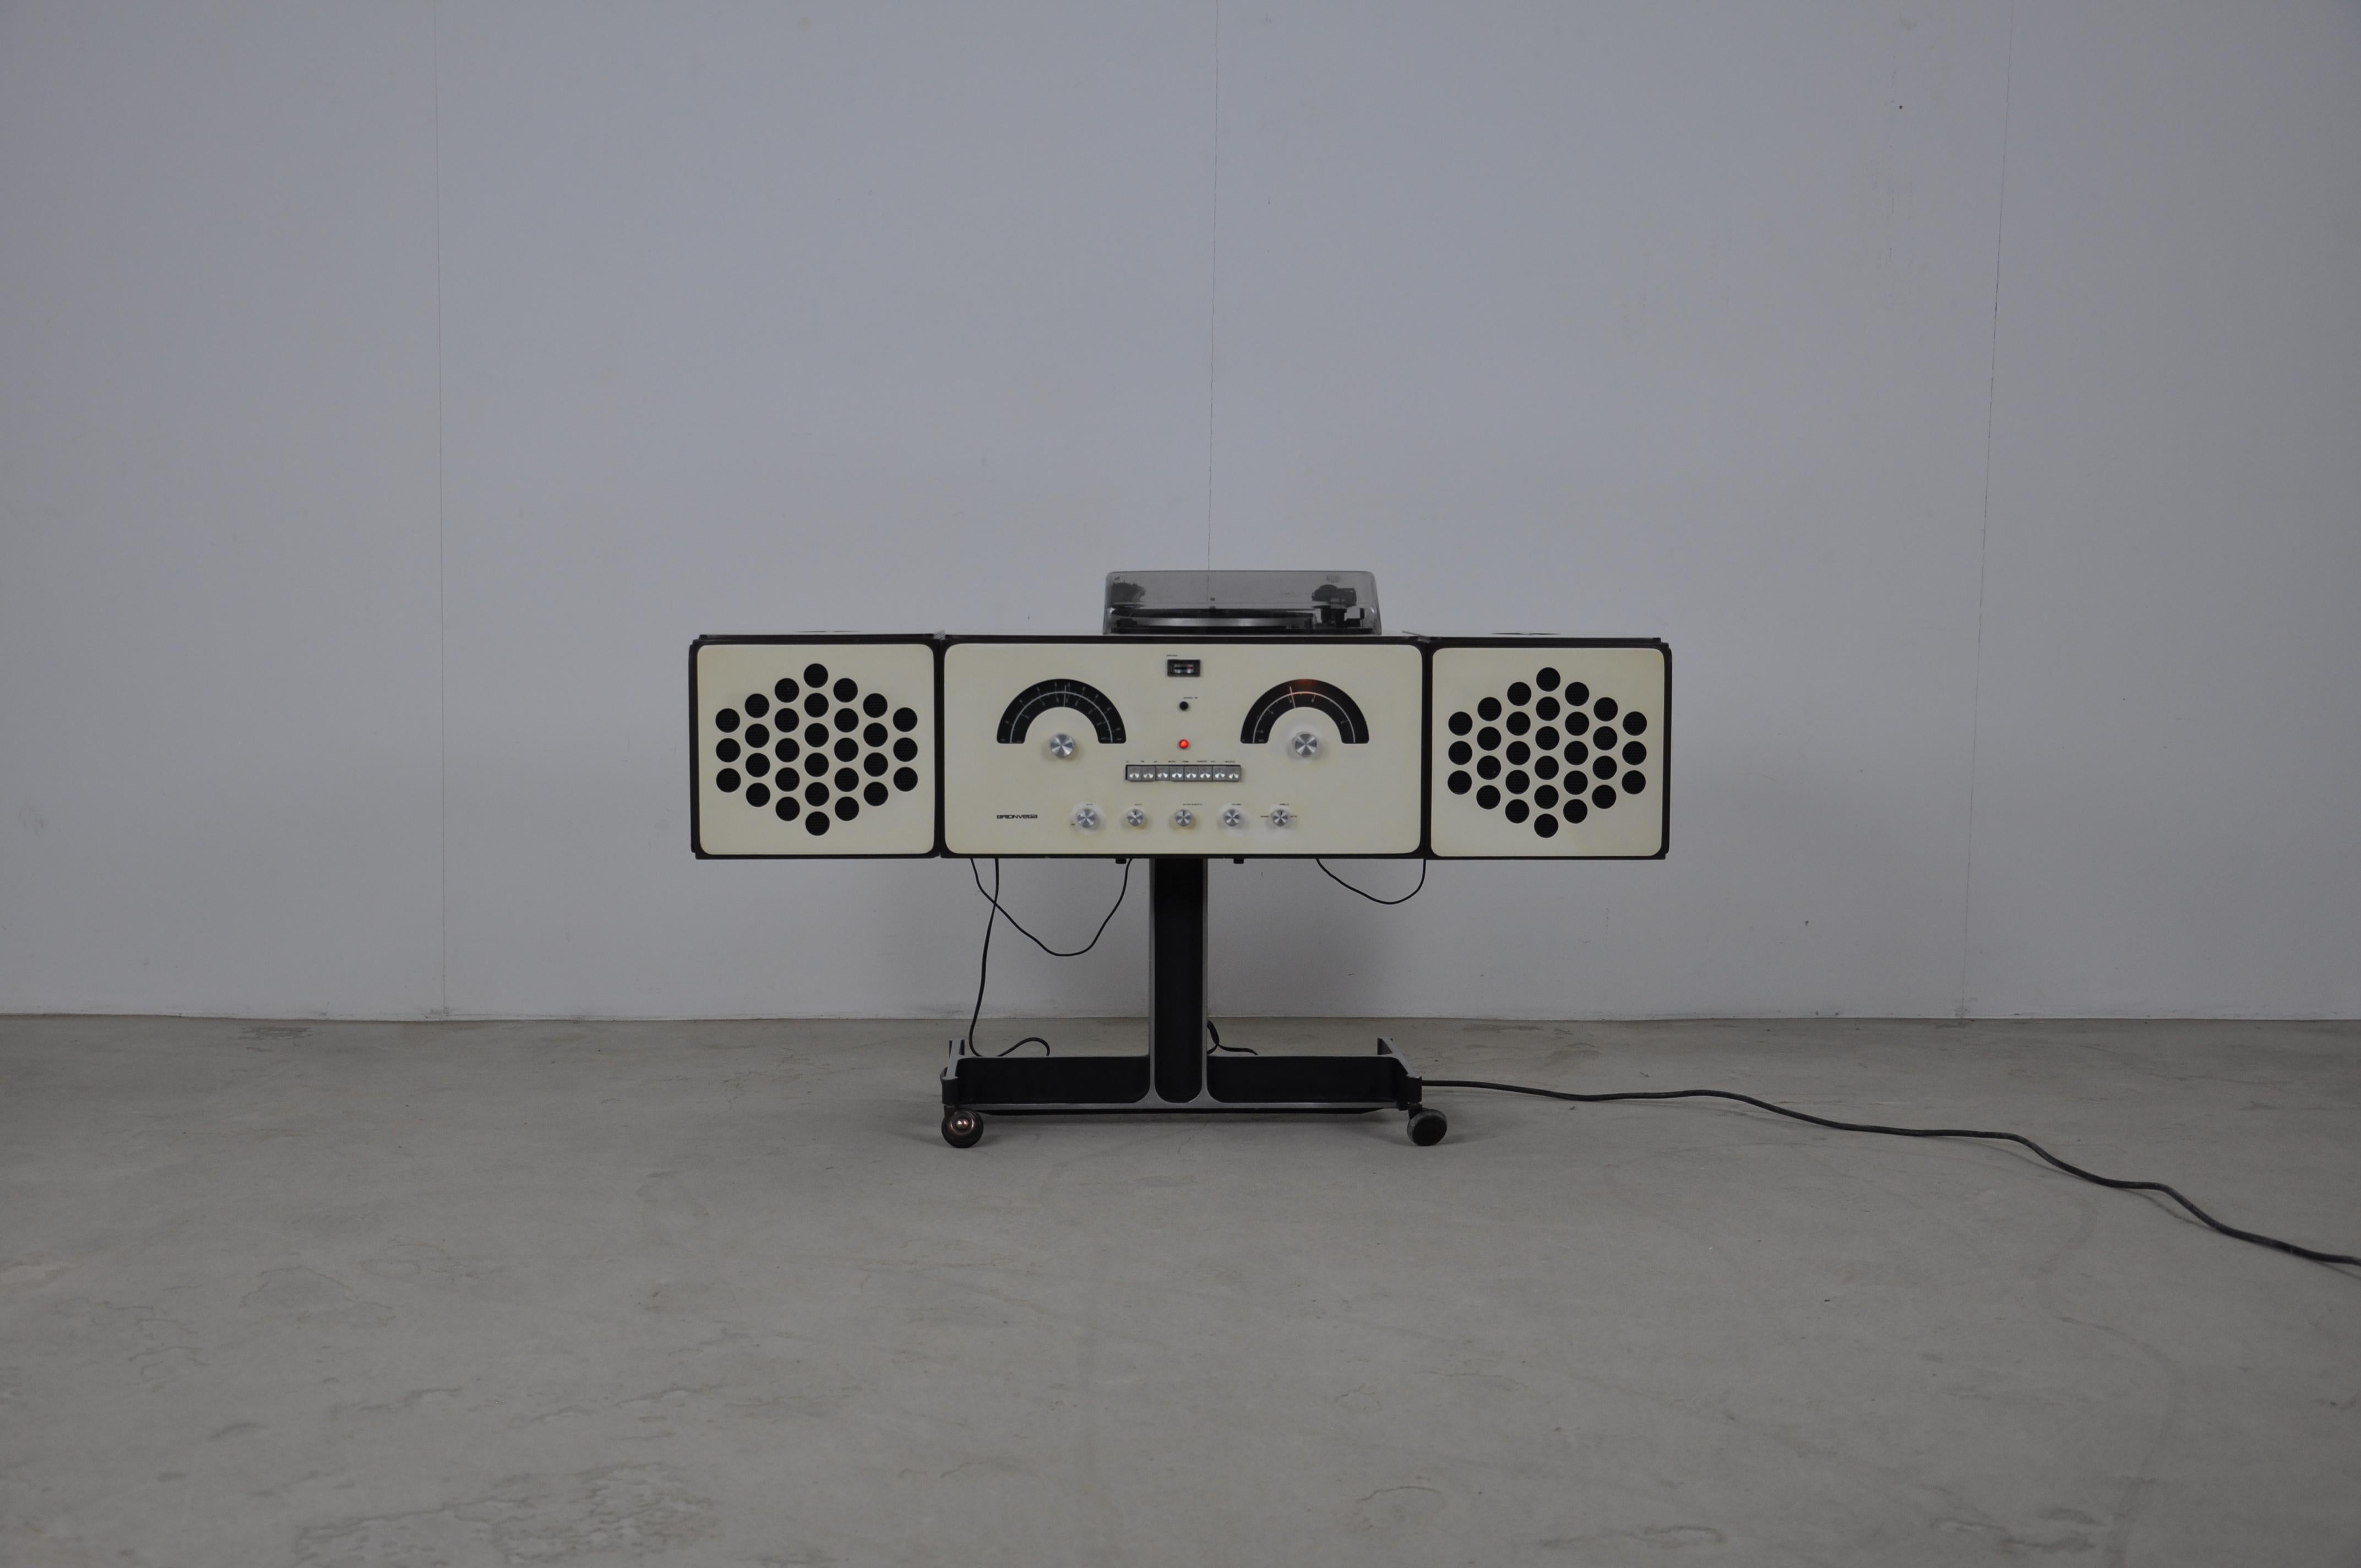 Radio disc player composed of two baffles that can be positioned in two ways (see photo) the radio works. Wear due to time and age of the radio. Stamped Brionvega.